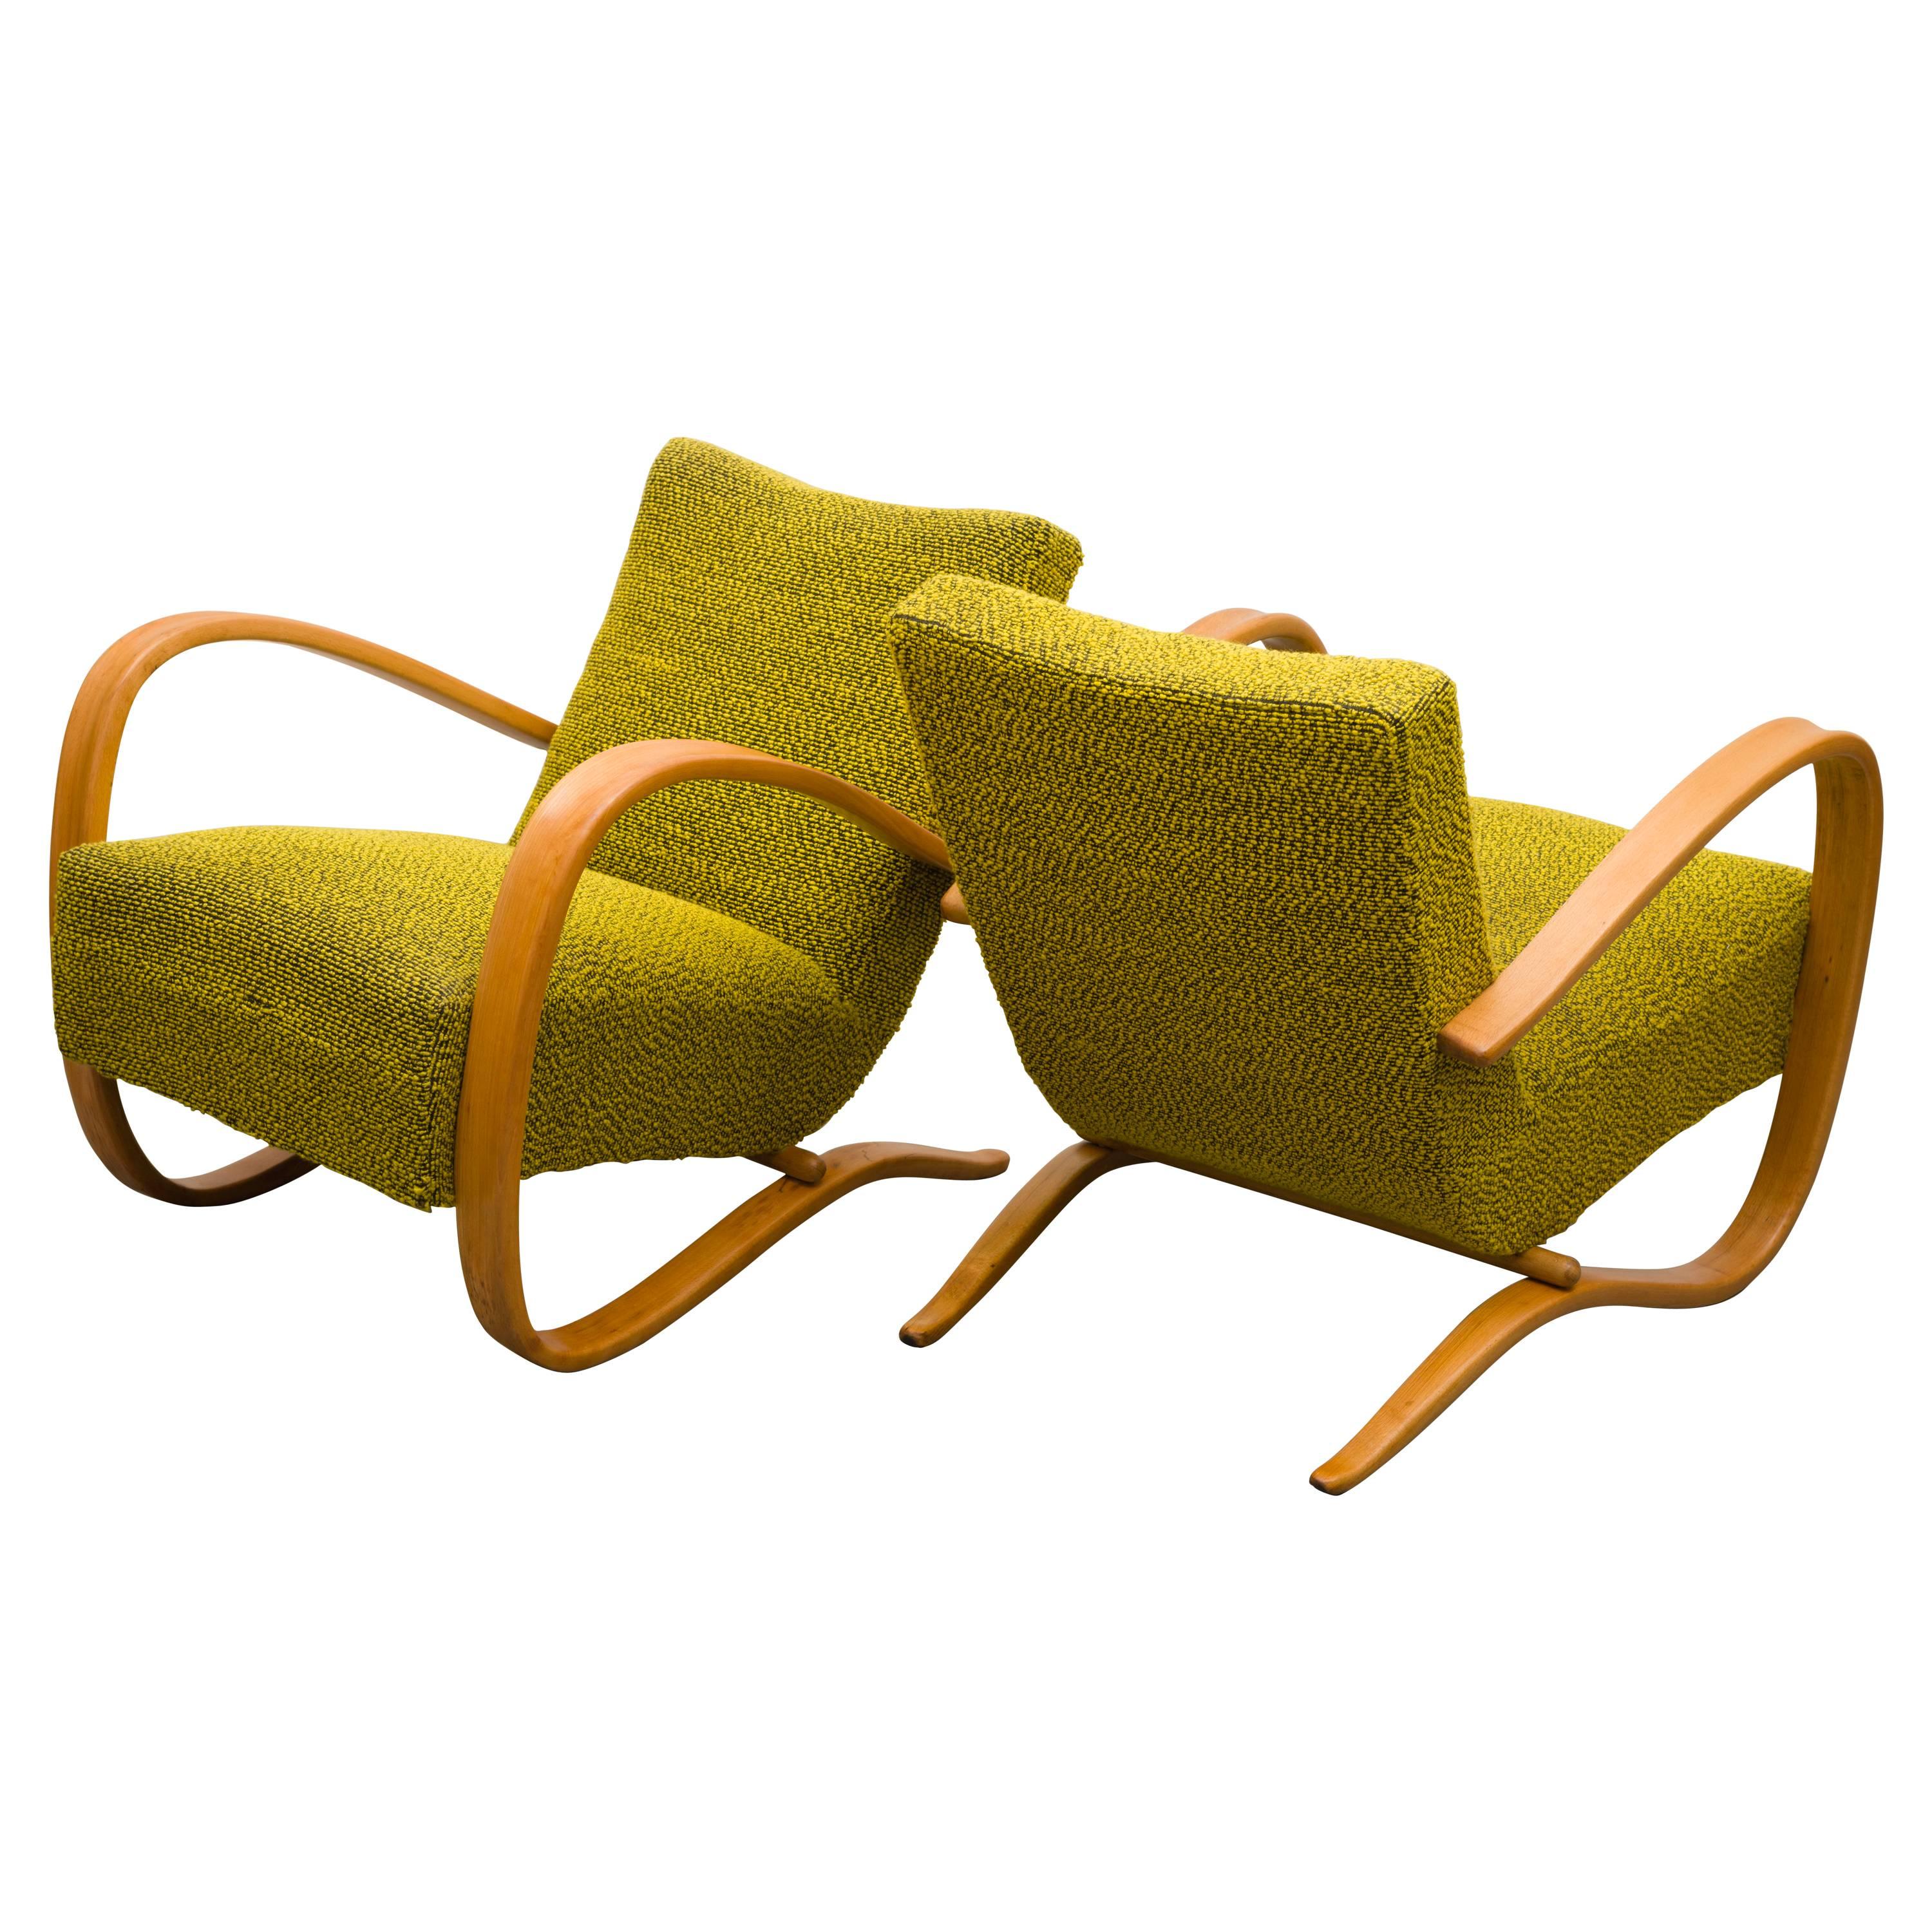 Two Lounge Chairs by Jindrich Halabala for UP Zavody in the 1930s